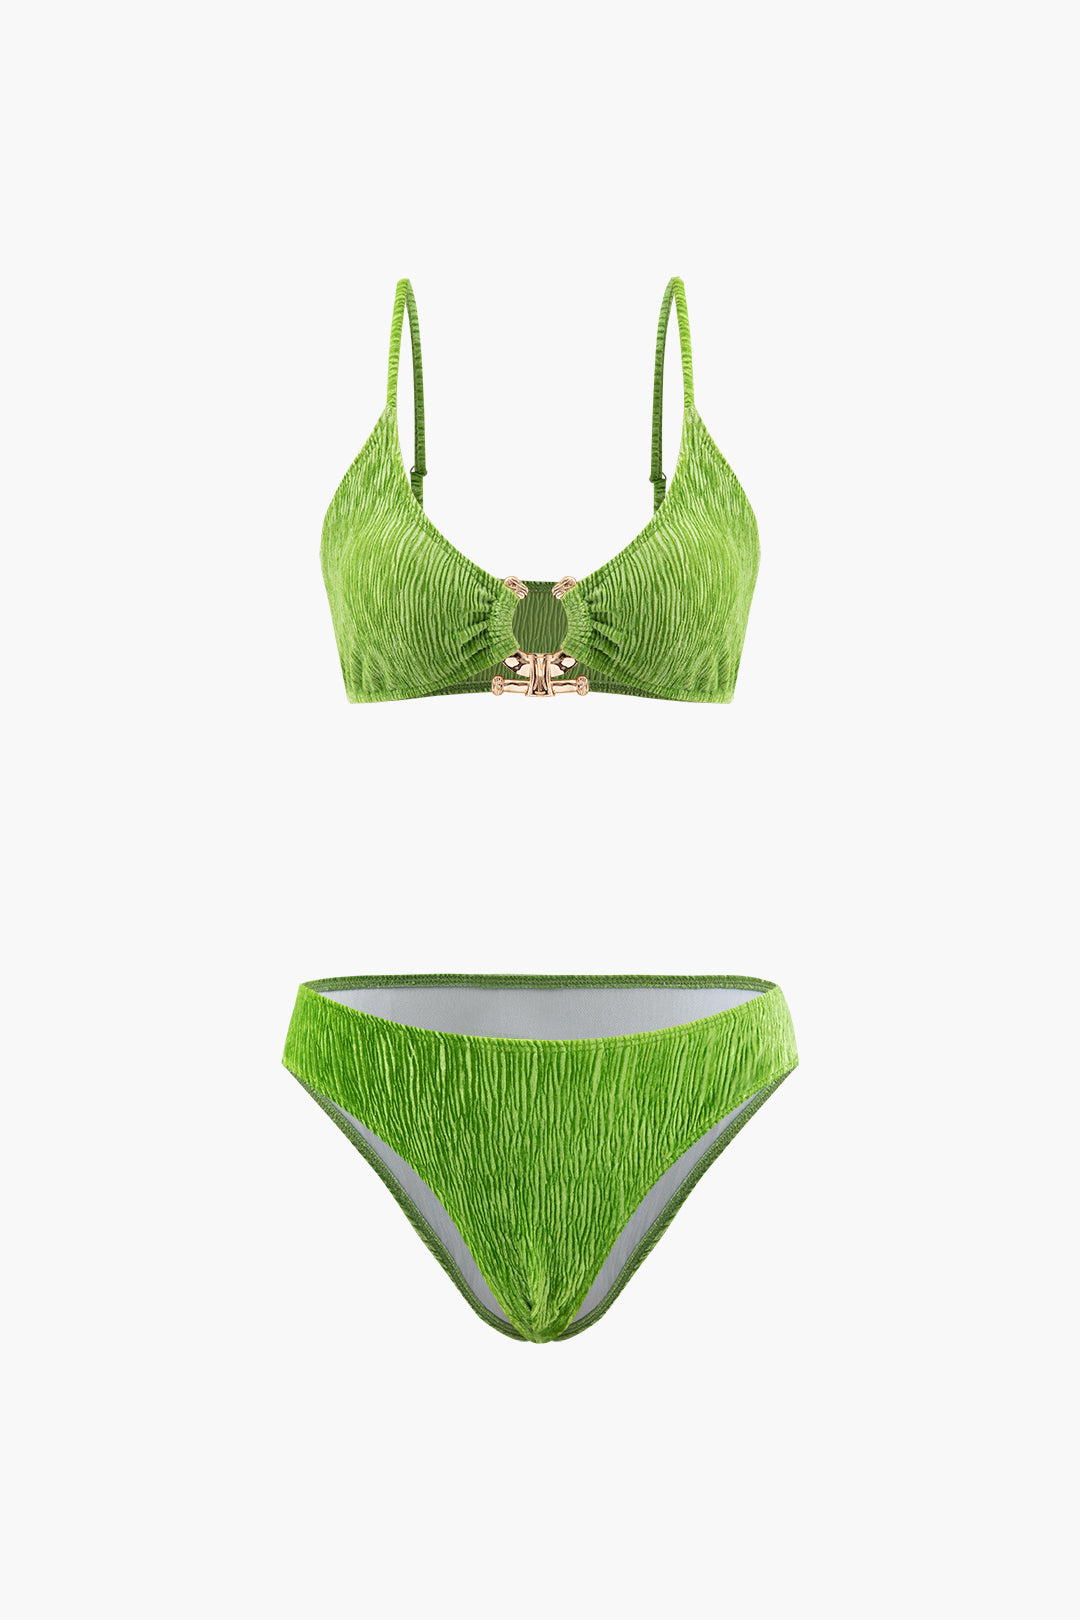 Lovebird Lingerie VY7166 2PSC. BIKINI SET WITH SARONG Solid Women Swimsuit  - Buy Lovebird Lingerie VY7166 2PSC. BIKINI SET WITH SARONG Solid Women  Swimsuit Online at Best Prices in India